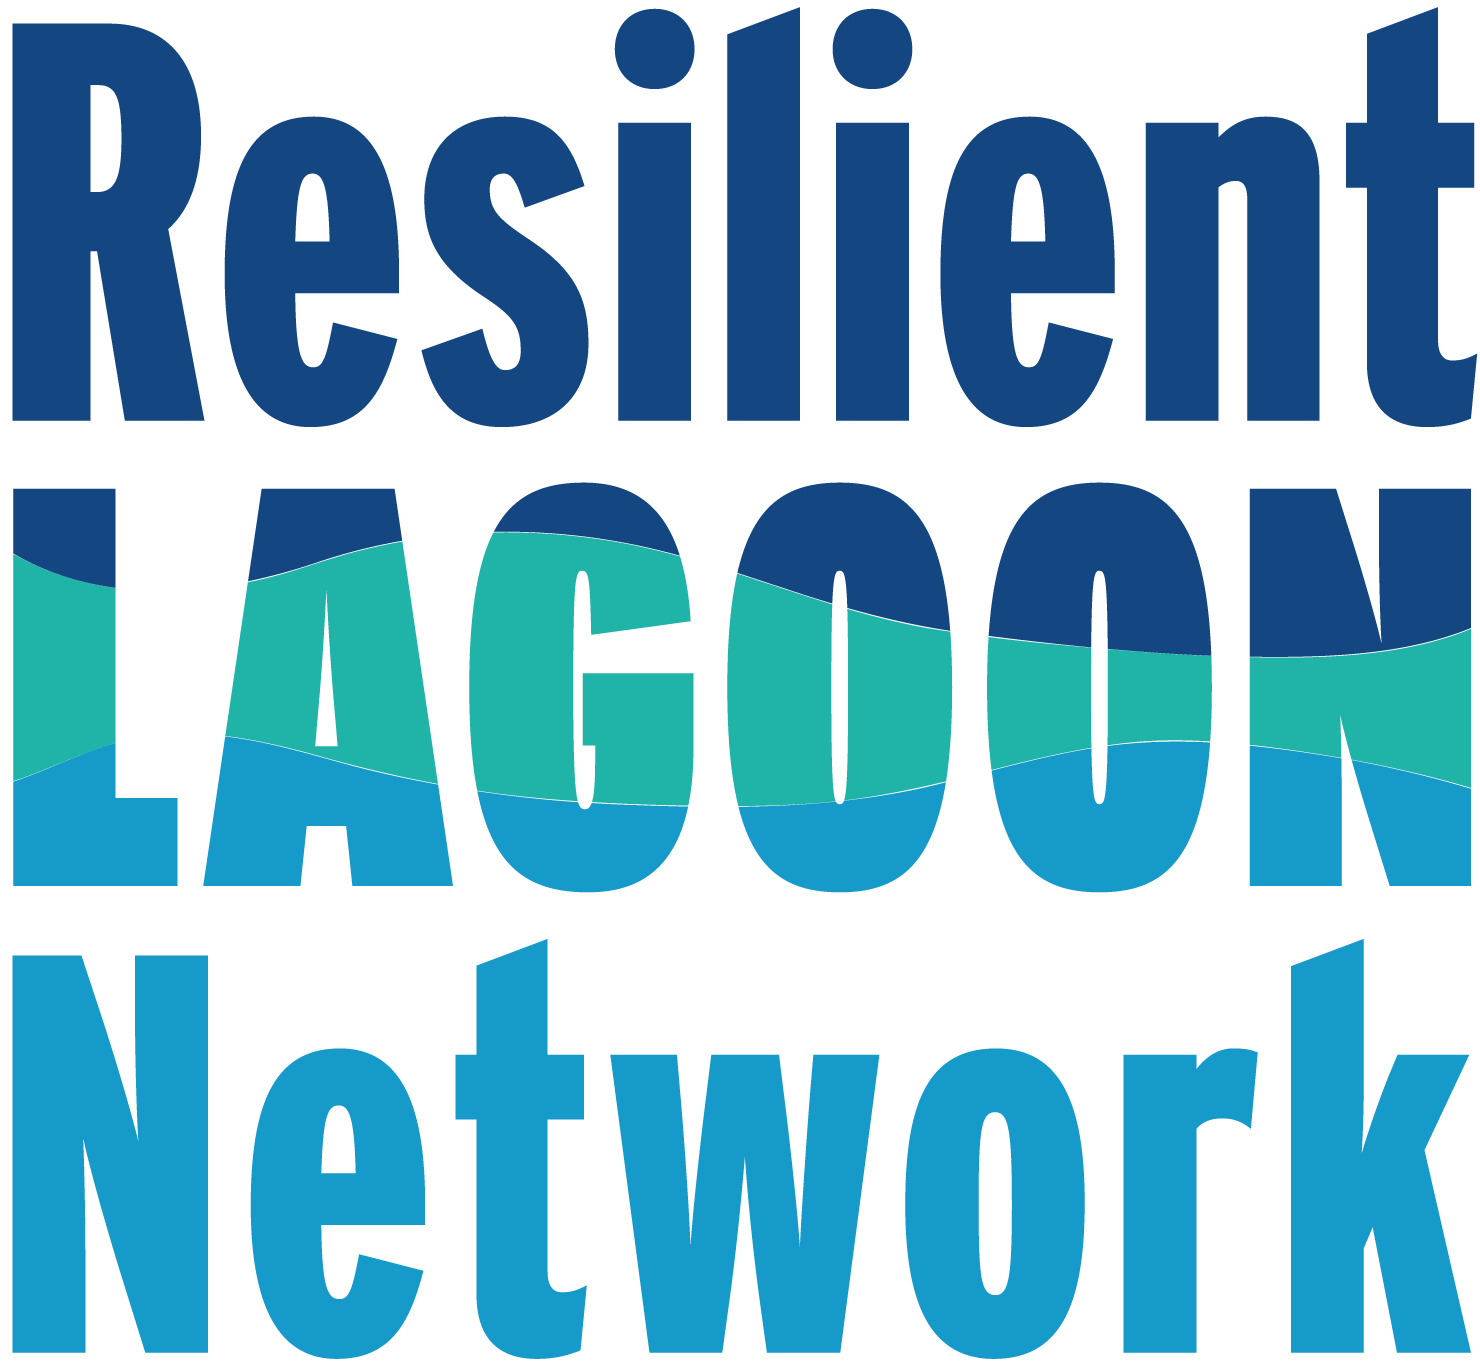 Resilient Lagoon Network